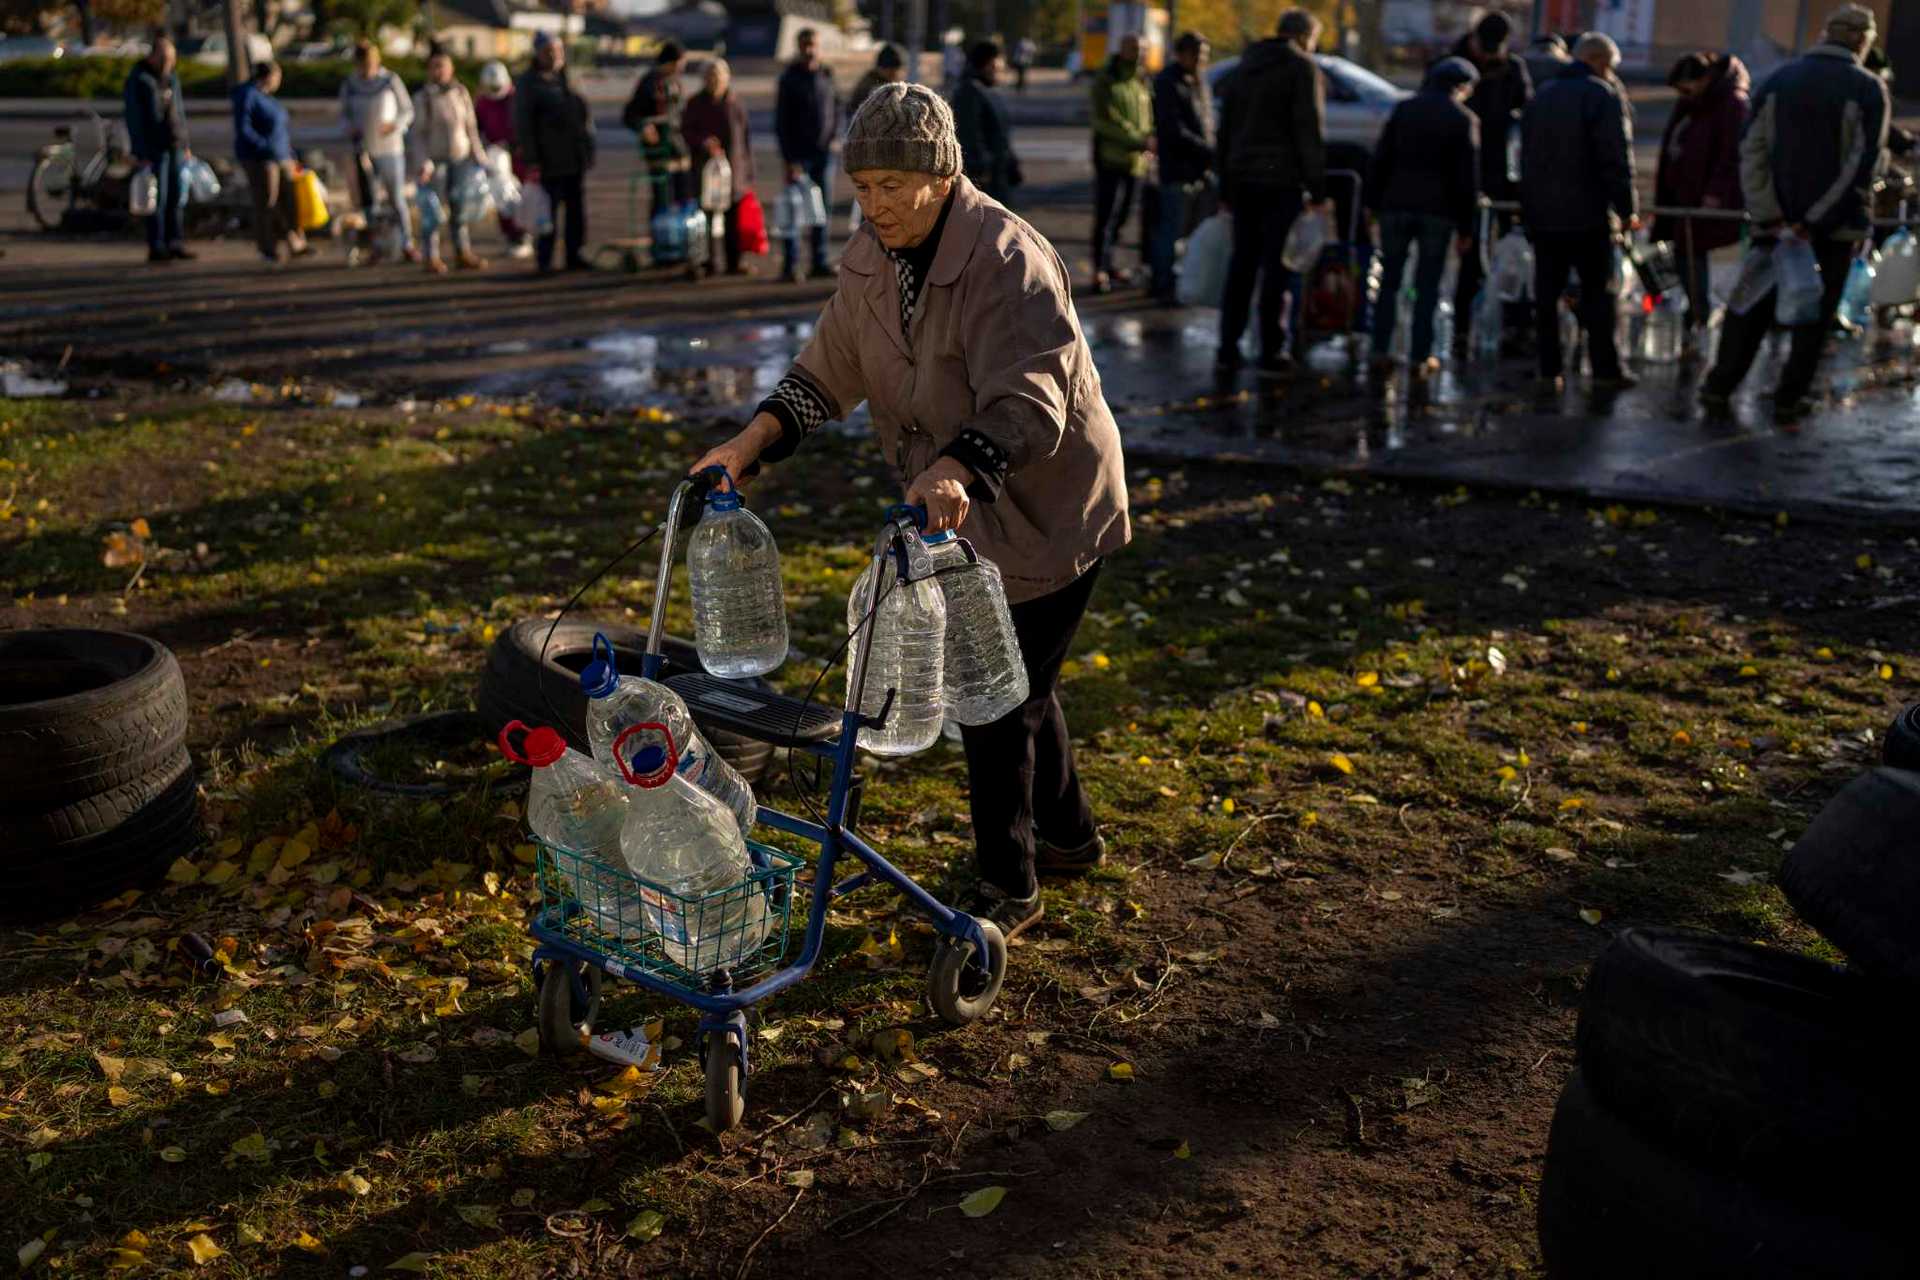 Catherine, 75, pushes her walker loaded with plastic bottles after refilling them in a tank, in the center of Mykolaiv